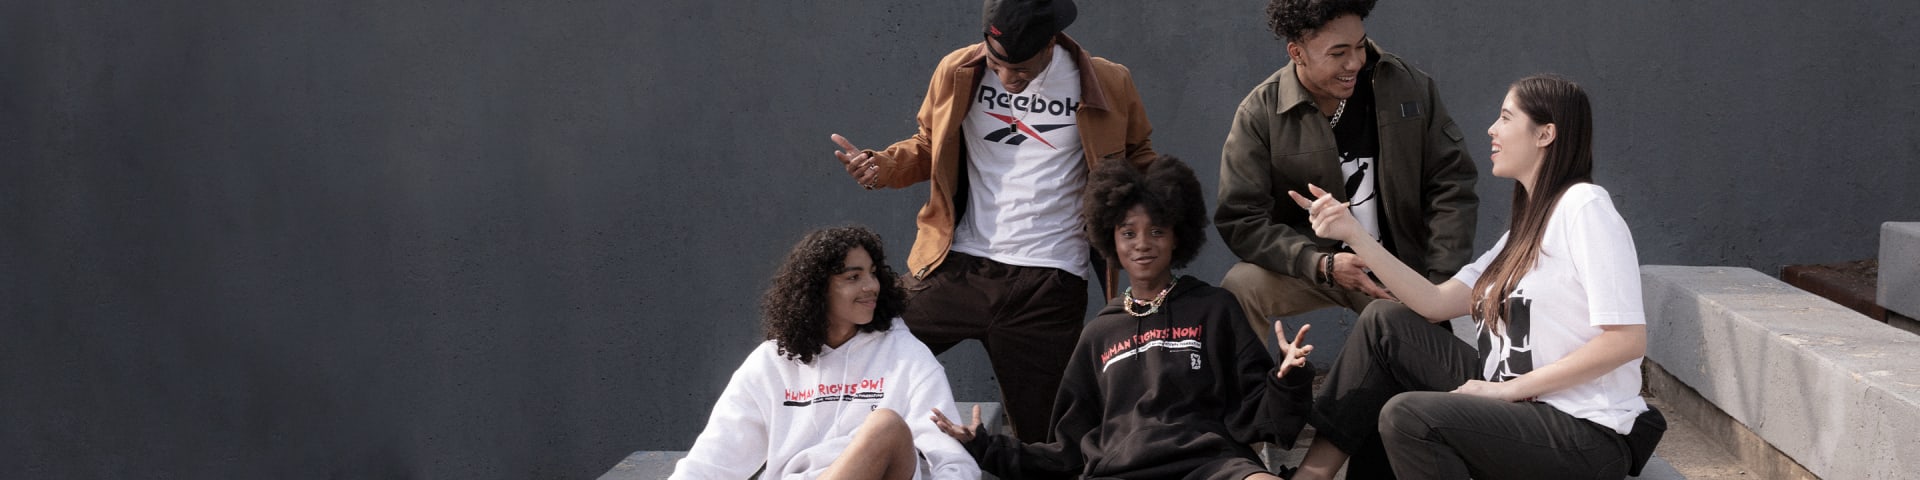 Human Rights Now - Shop Collection | Reebok US